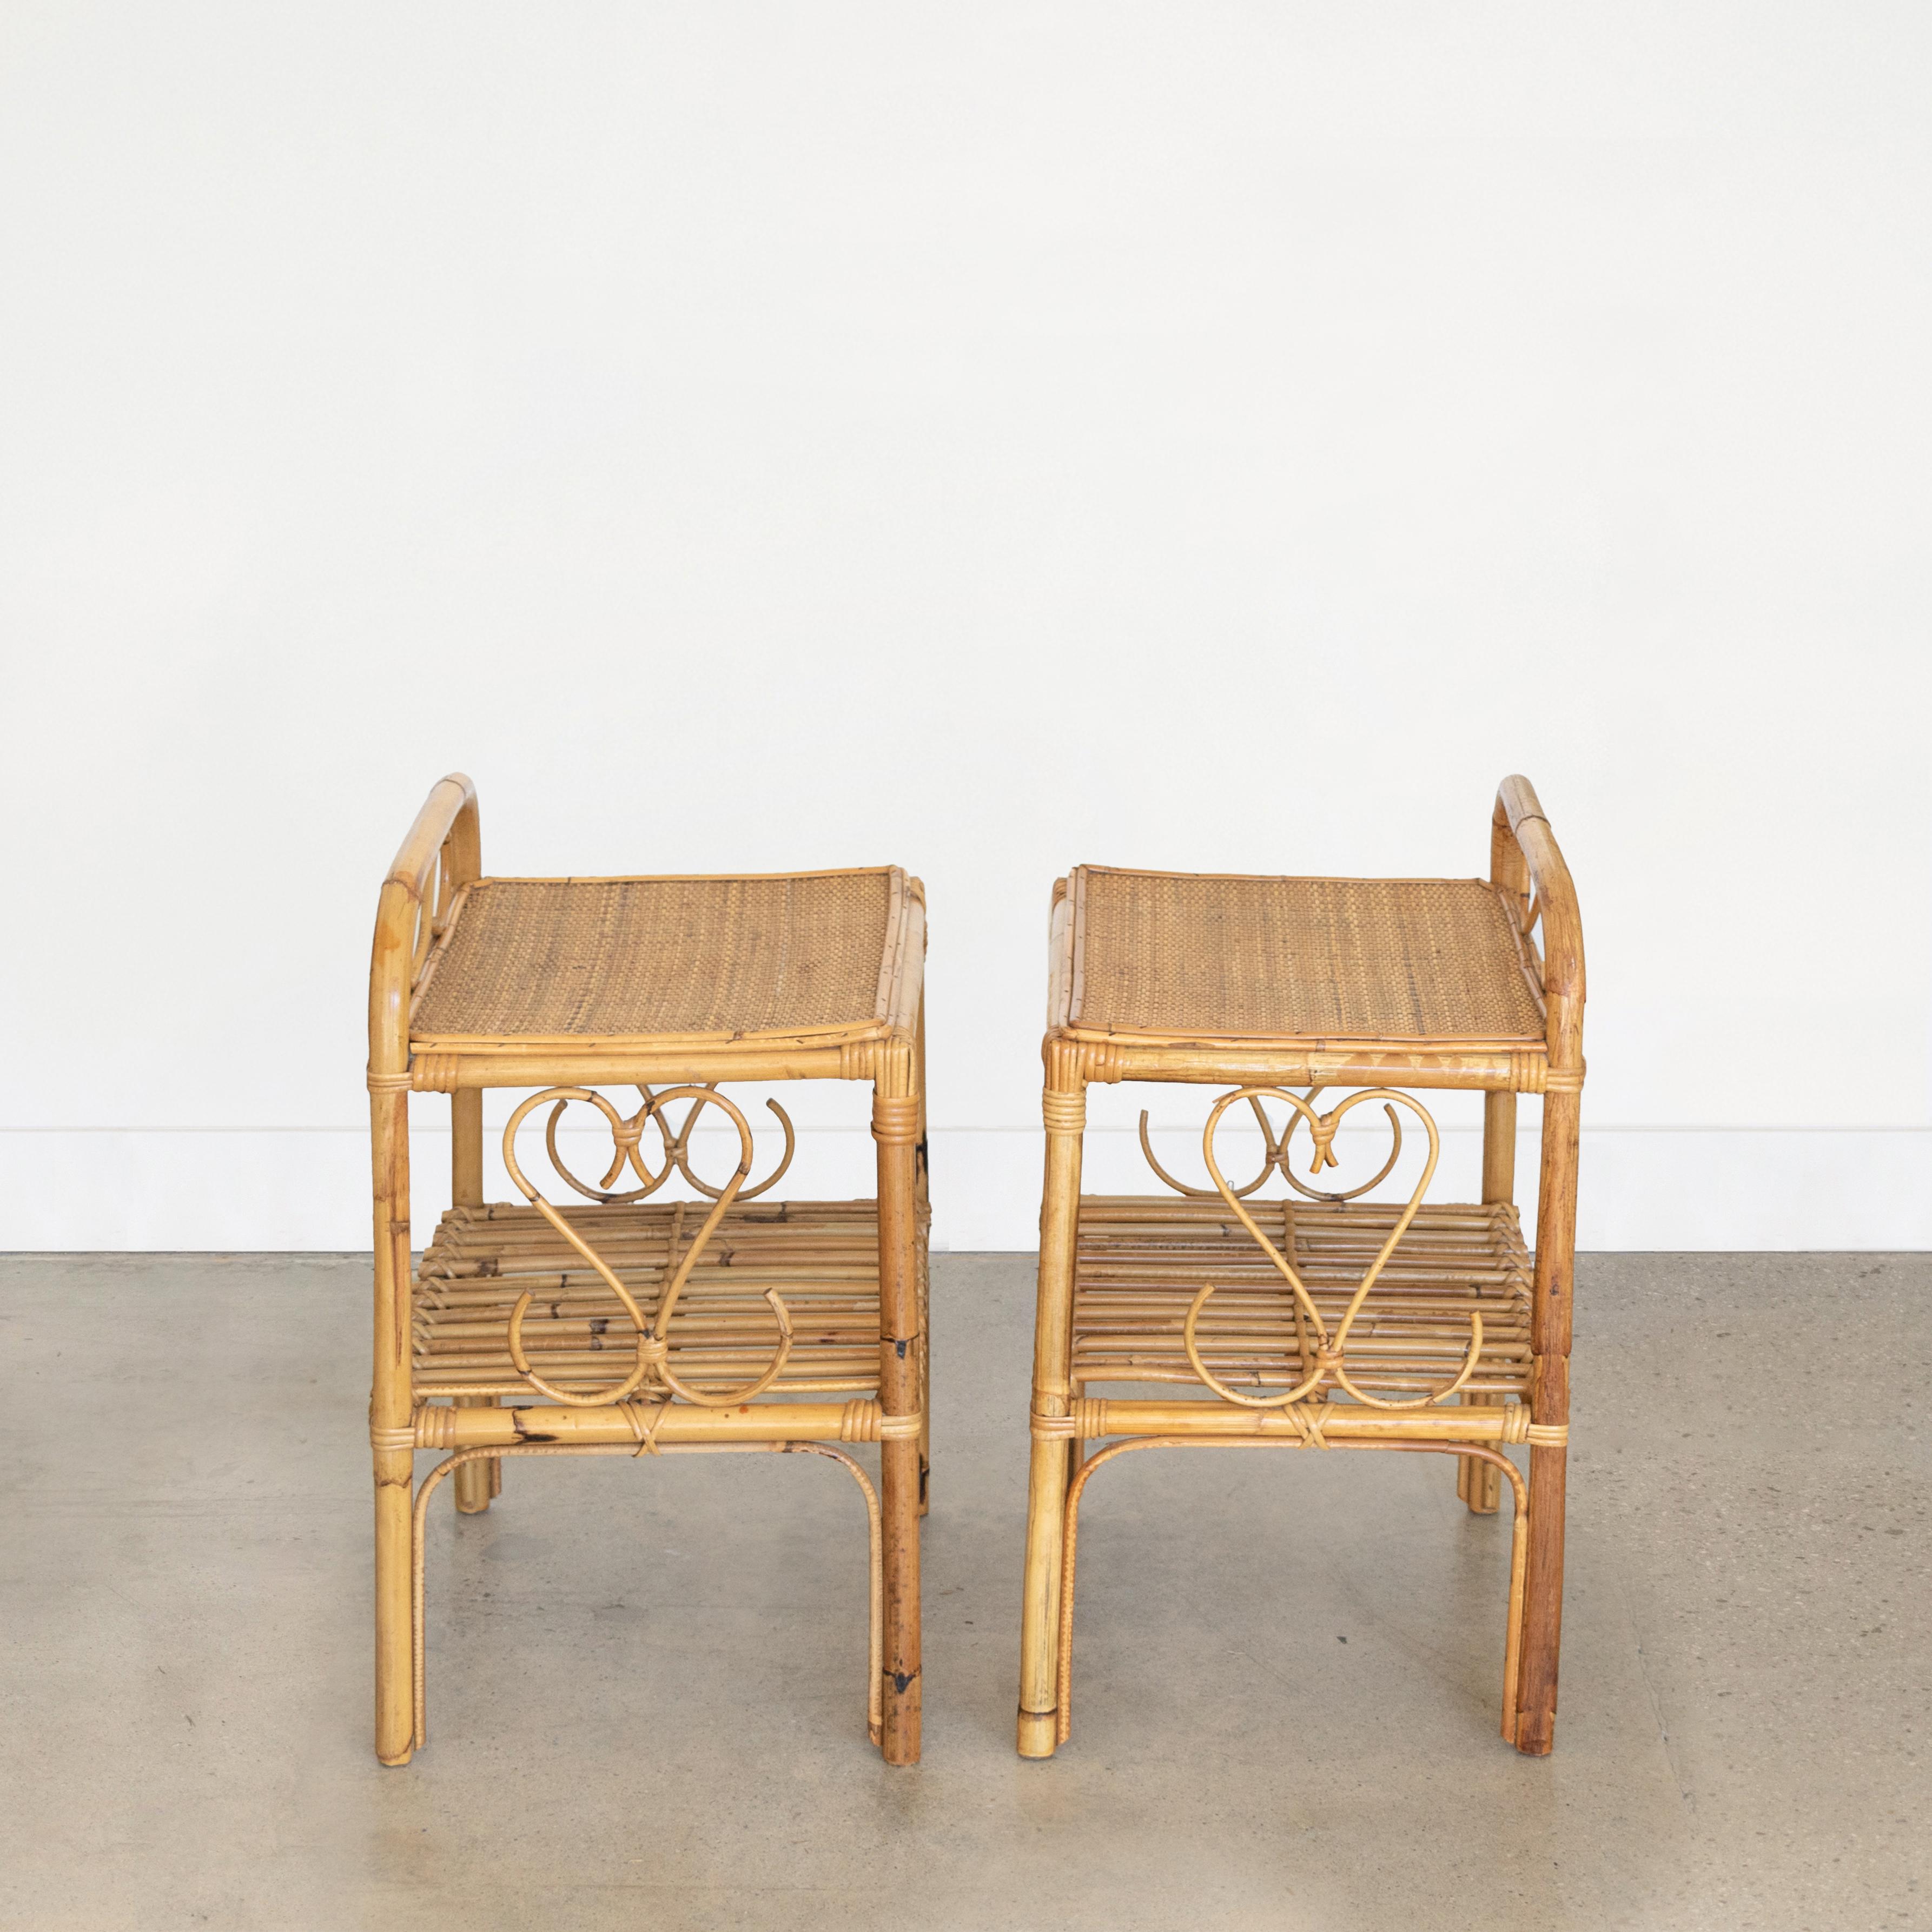 20th Century Pair of Italian Rattan Bed Side Tables